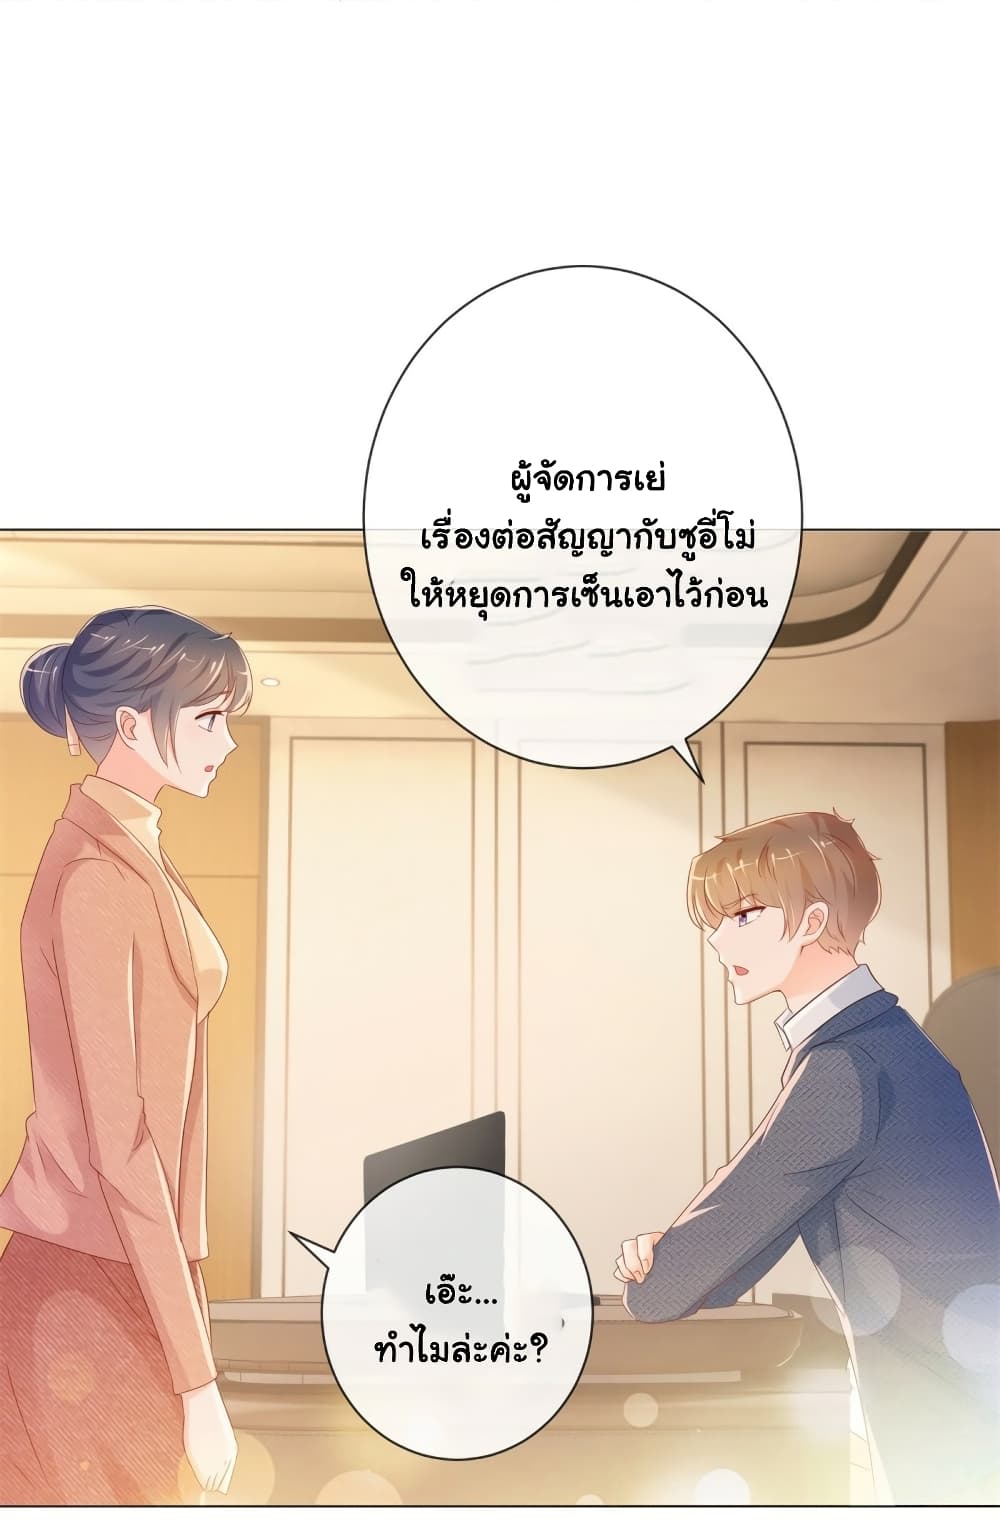 The Lovely Wife And Strange Marriage à¹à¸œà¸™à¸£à¸±à¸à¸¥à¸§à¸‡à¹ƒà¸ˆ 322 (22)